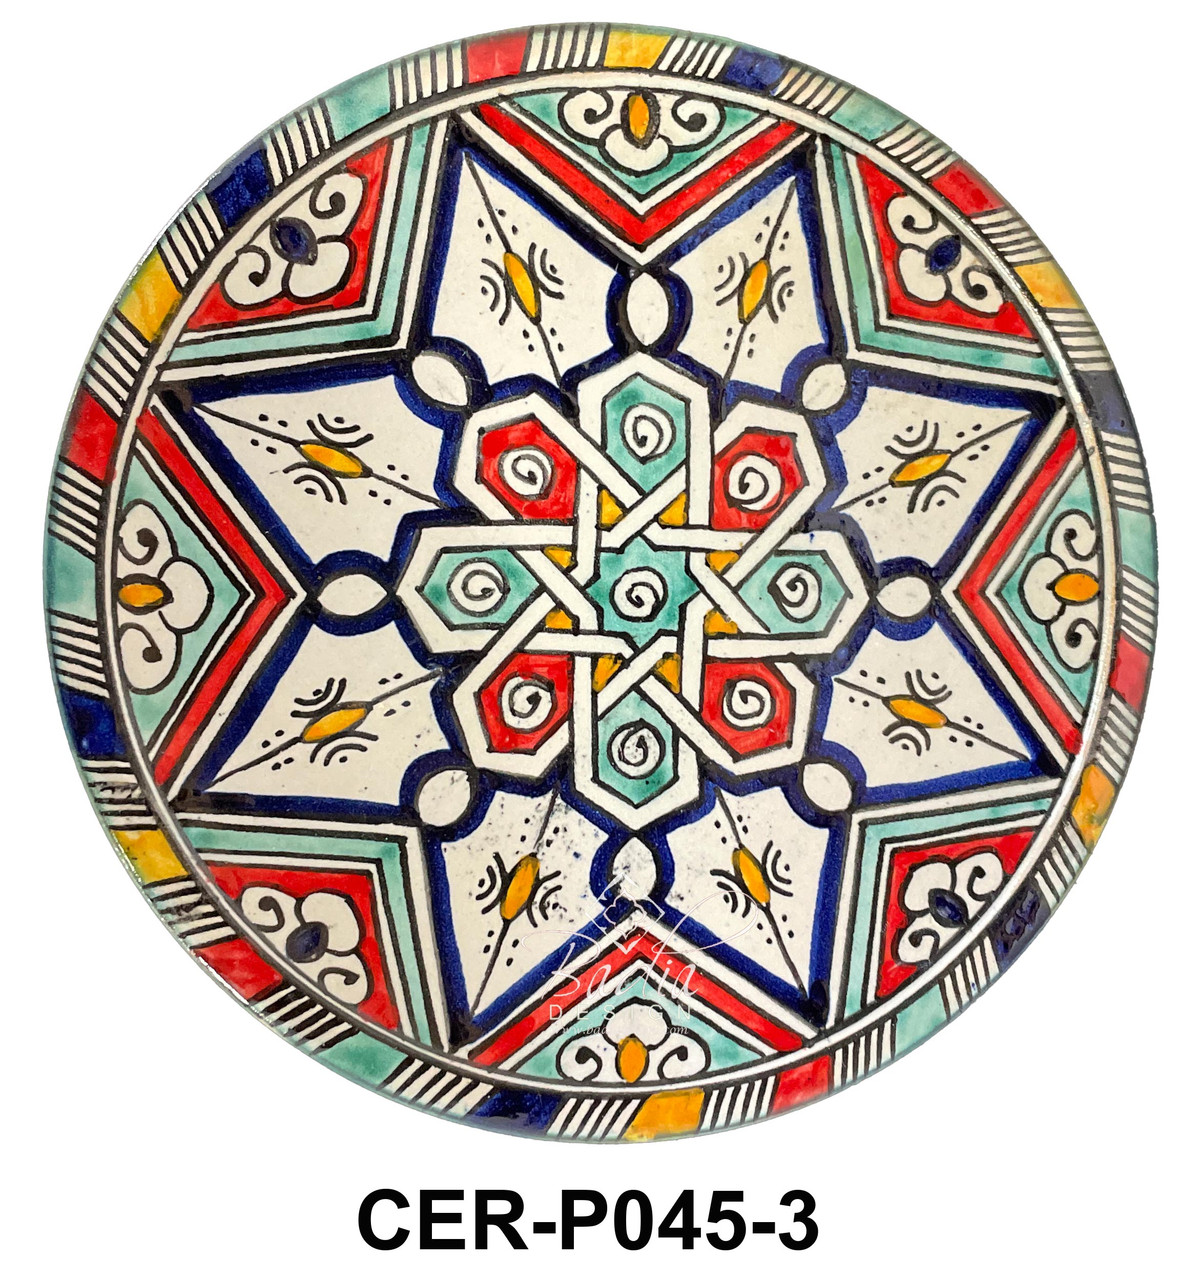 9 Inch Wide Hand Painted Multi-Color Ceramic Plates - CER-P045